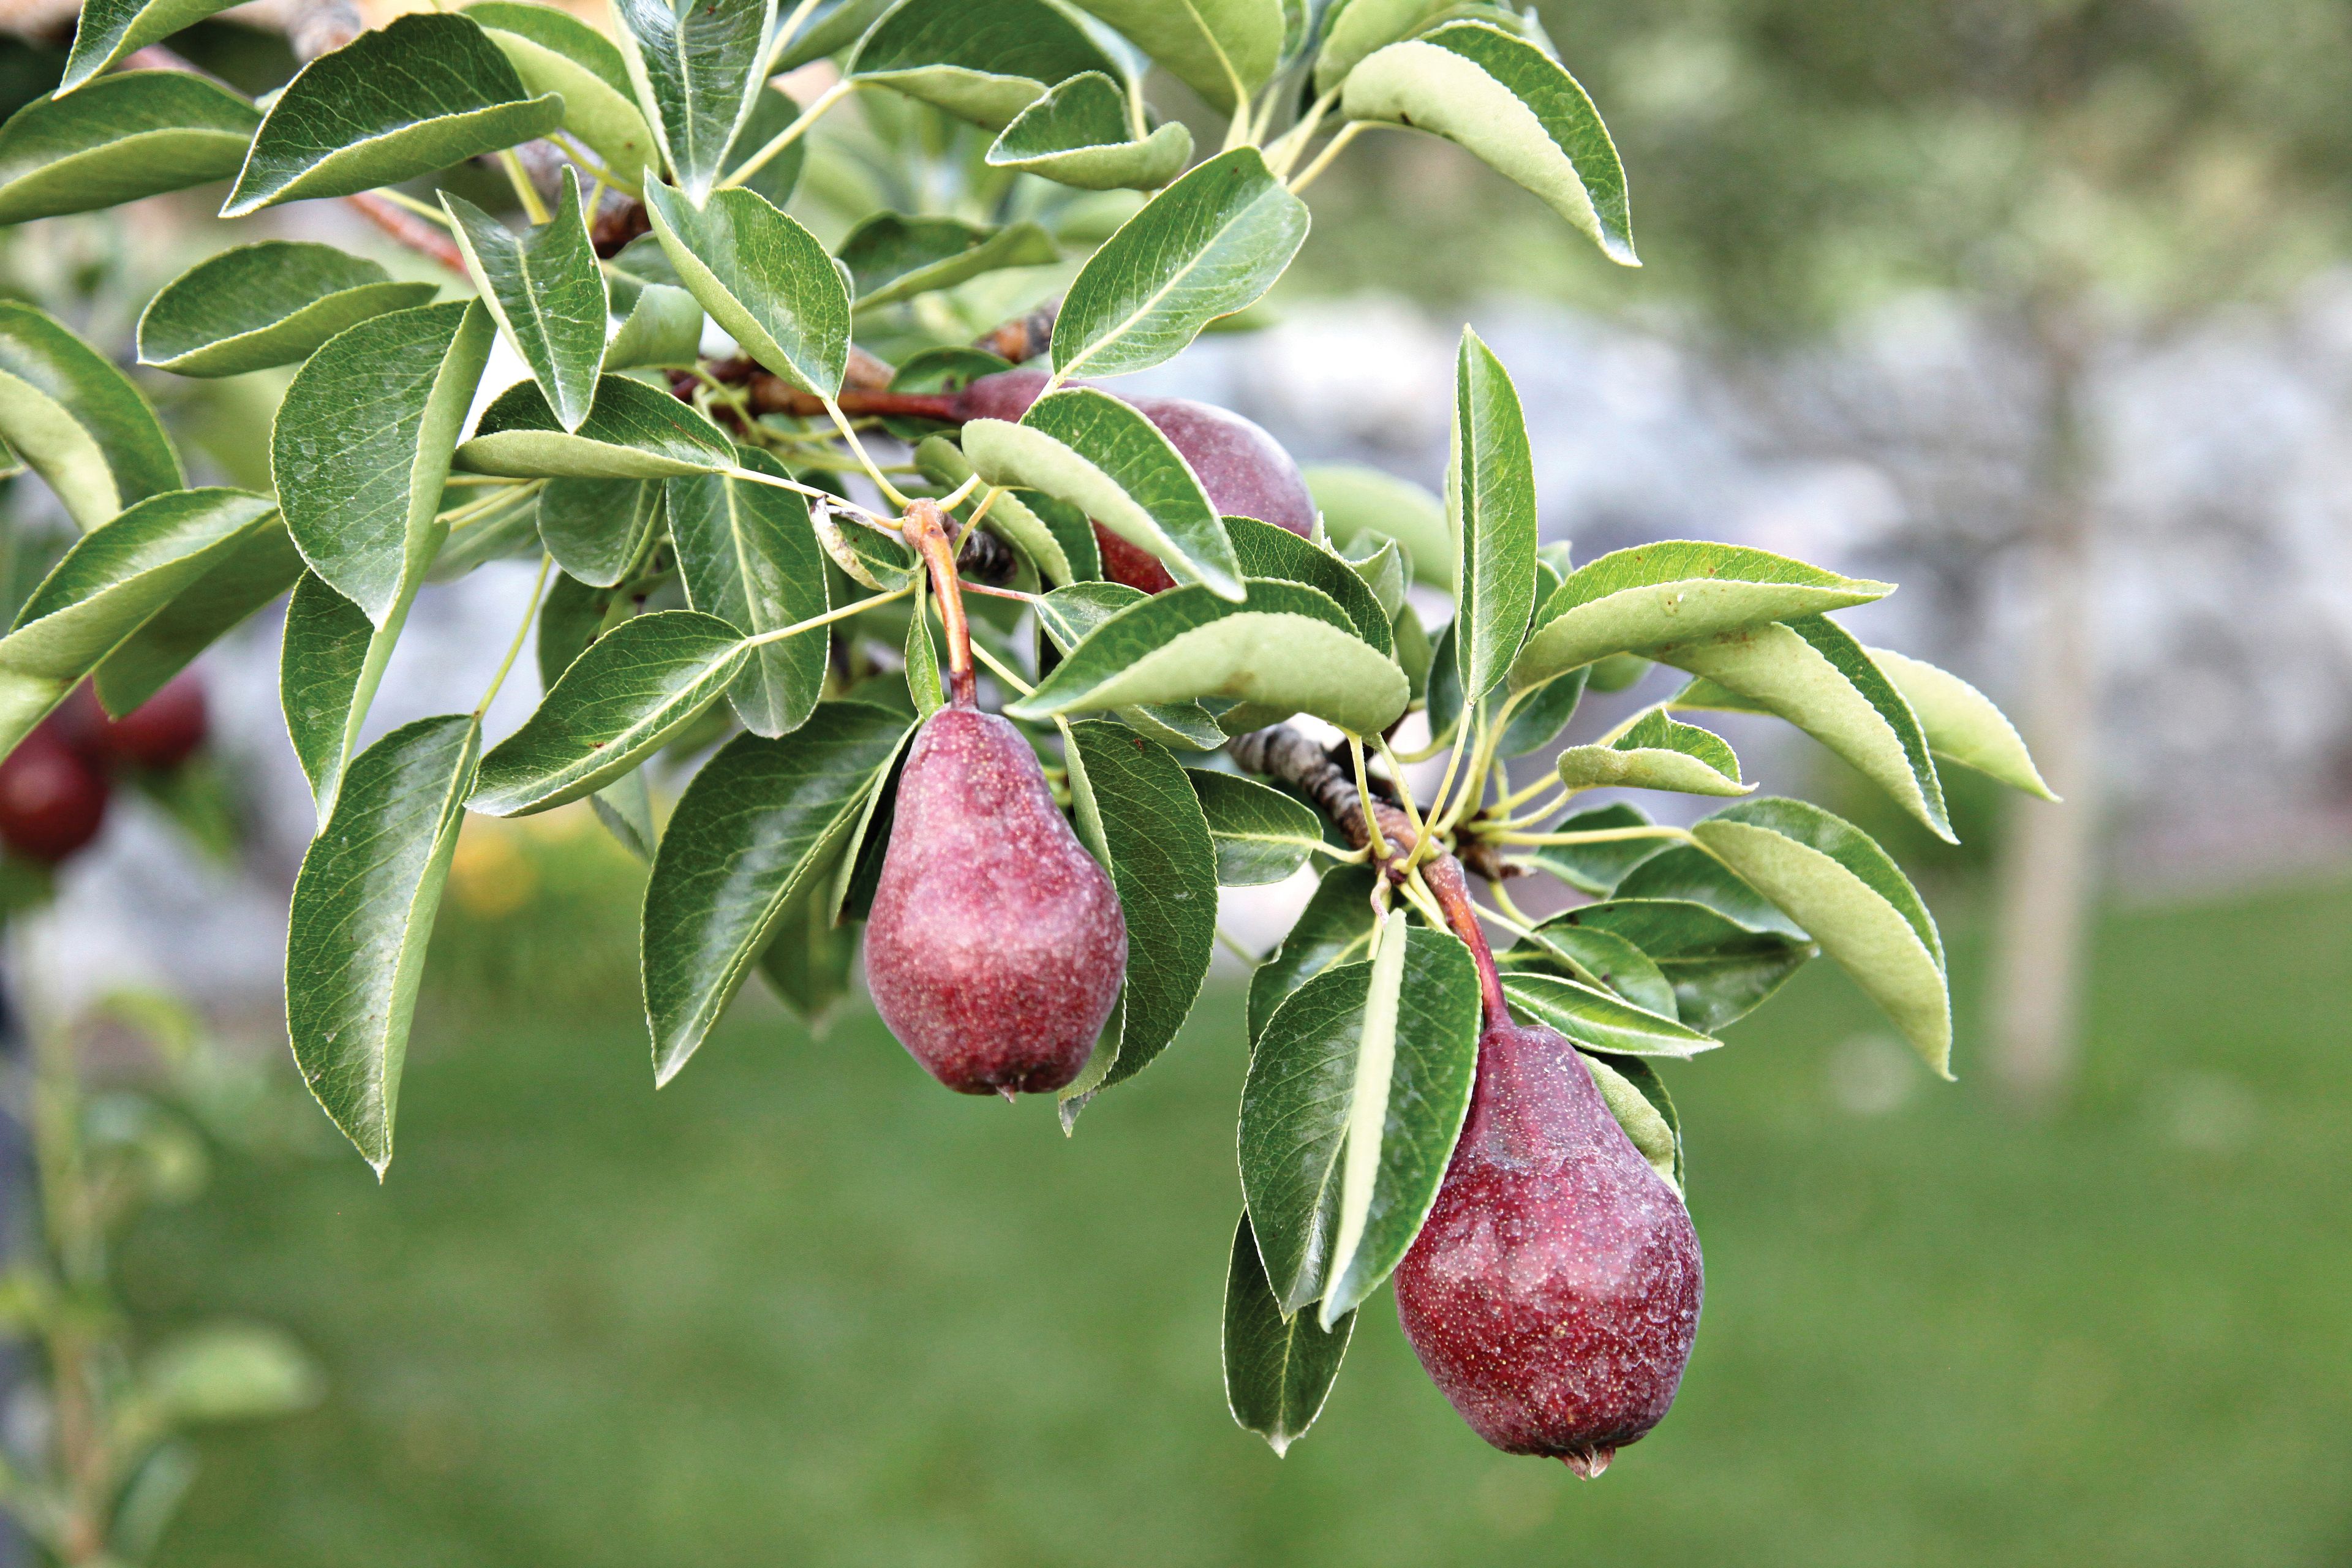 A photograph of red pears on a pear tree.